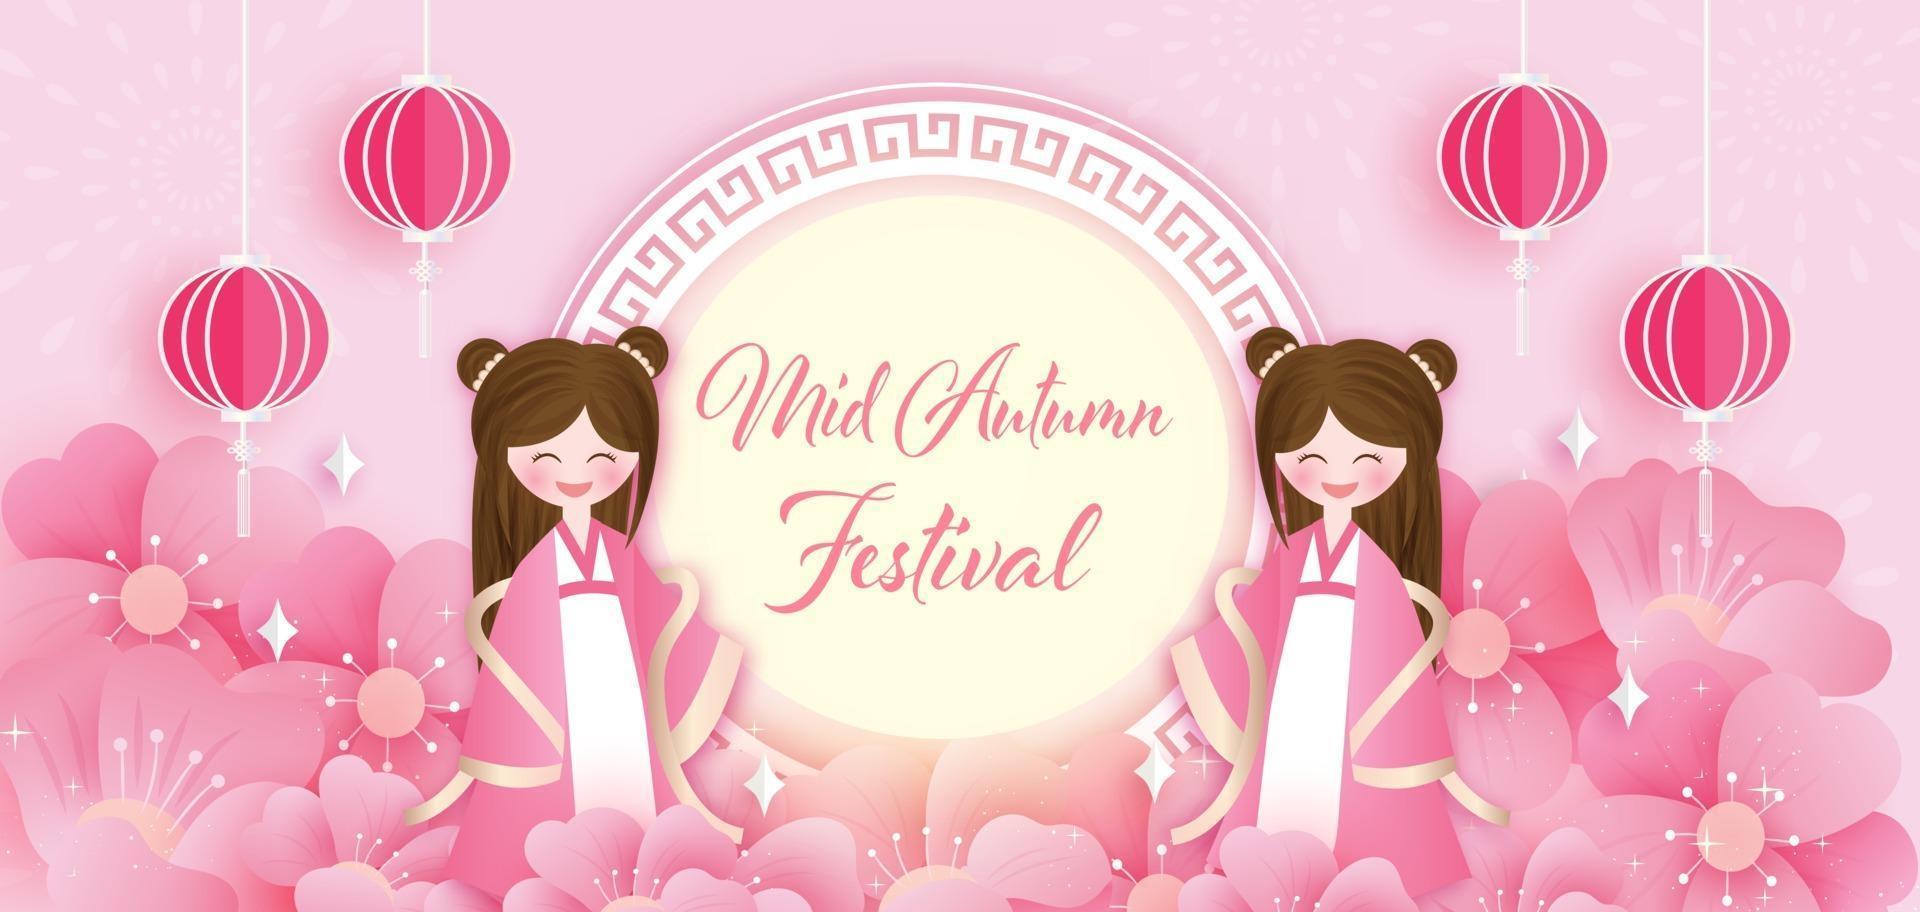 Mid autumn festival banner in paper cut atyle vector